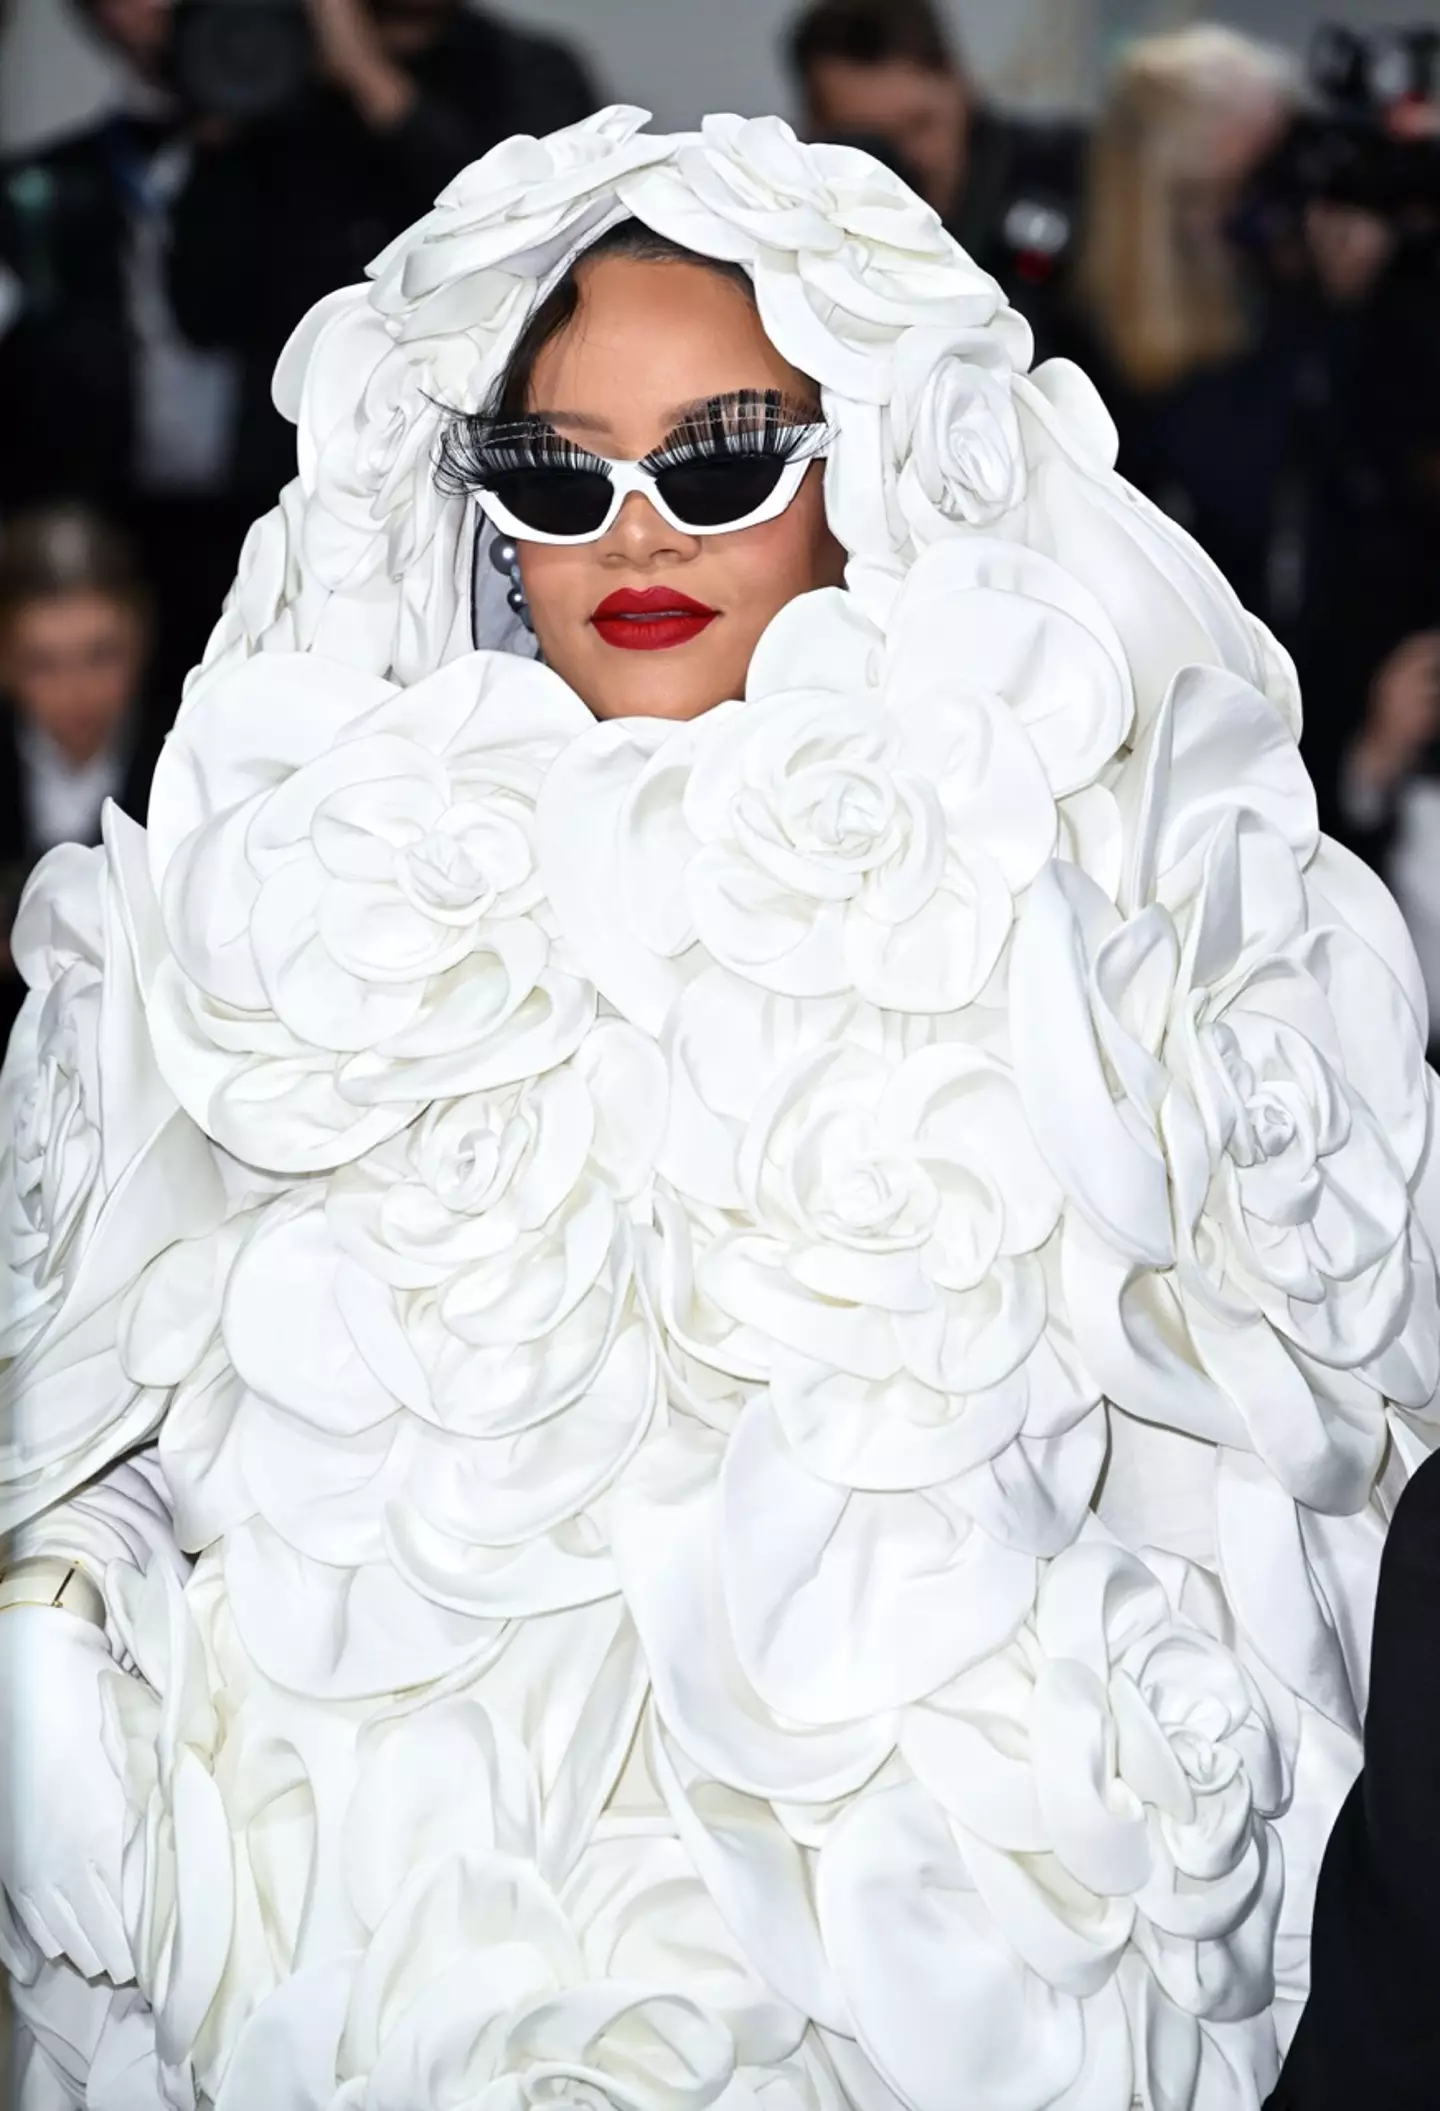 Rihanna accessorised the bold outfit with white sunglasses featuring 3D lashes.